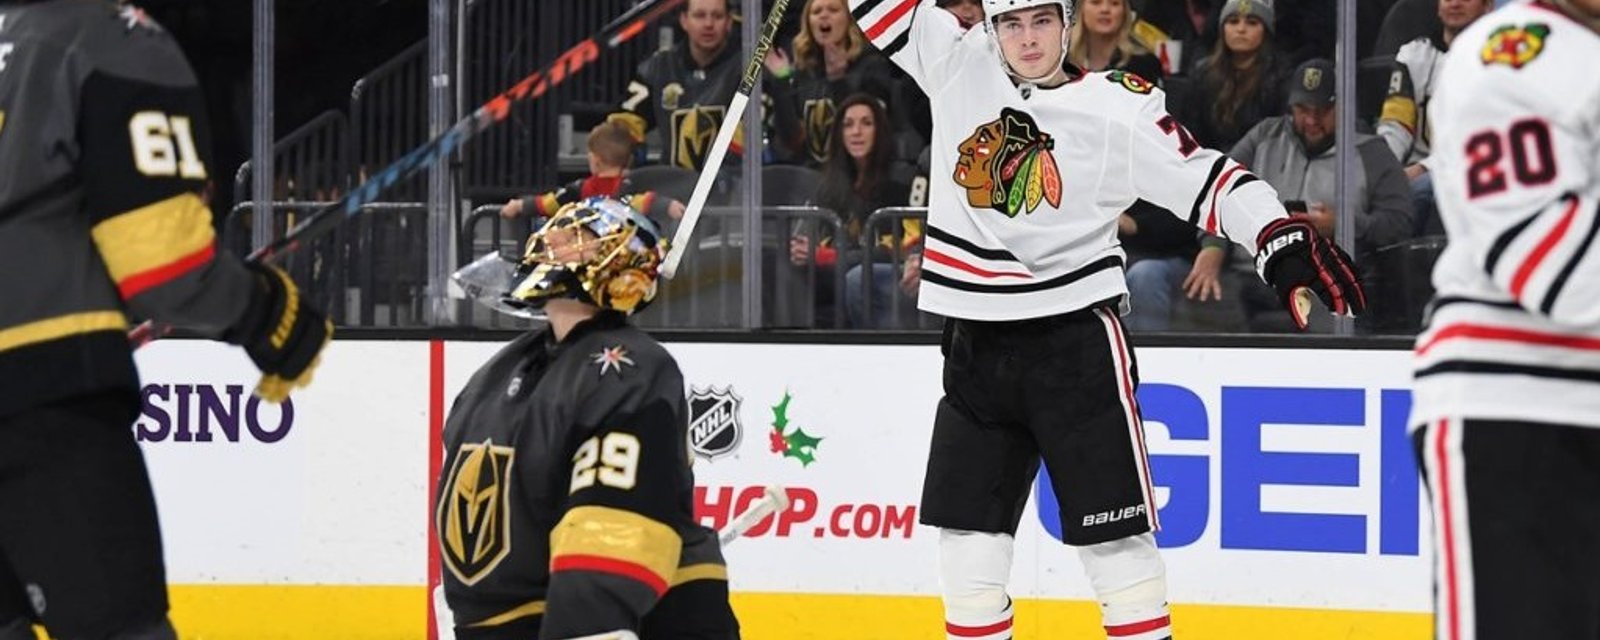 Rumor: Blackhawks will get a big boost thanks to the season stoppage.